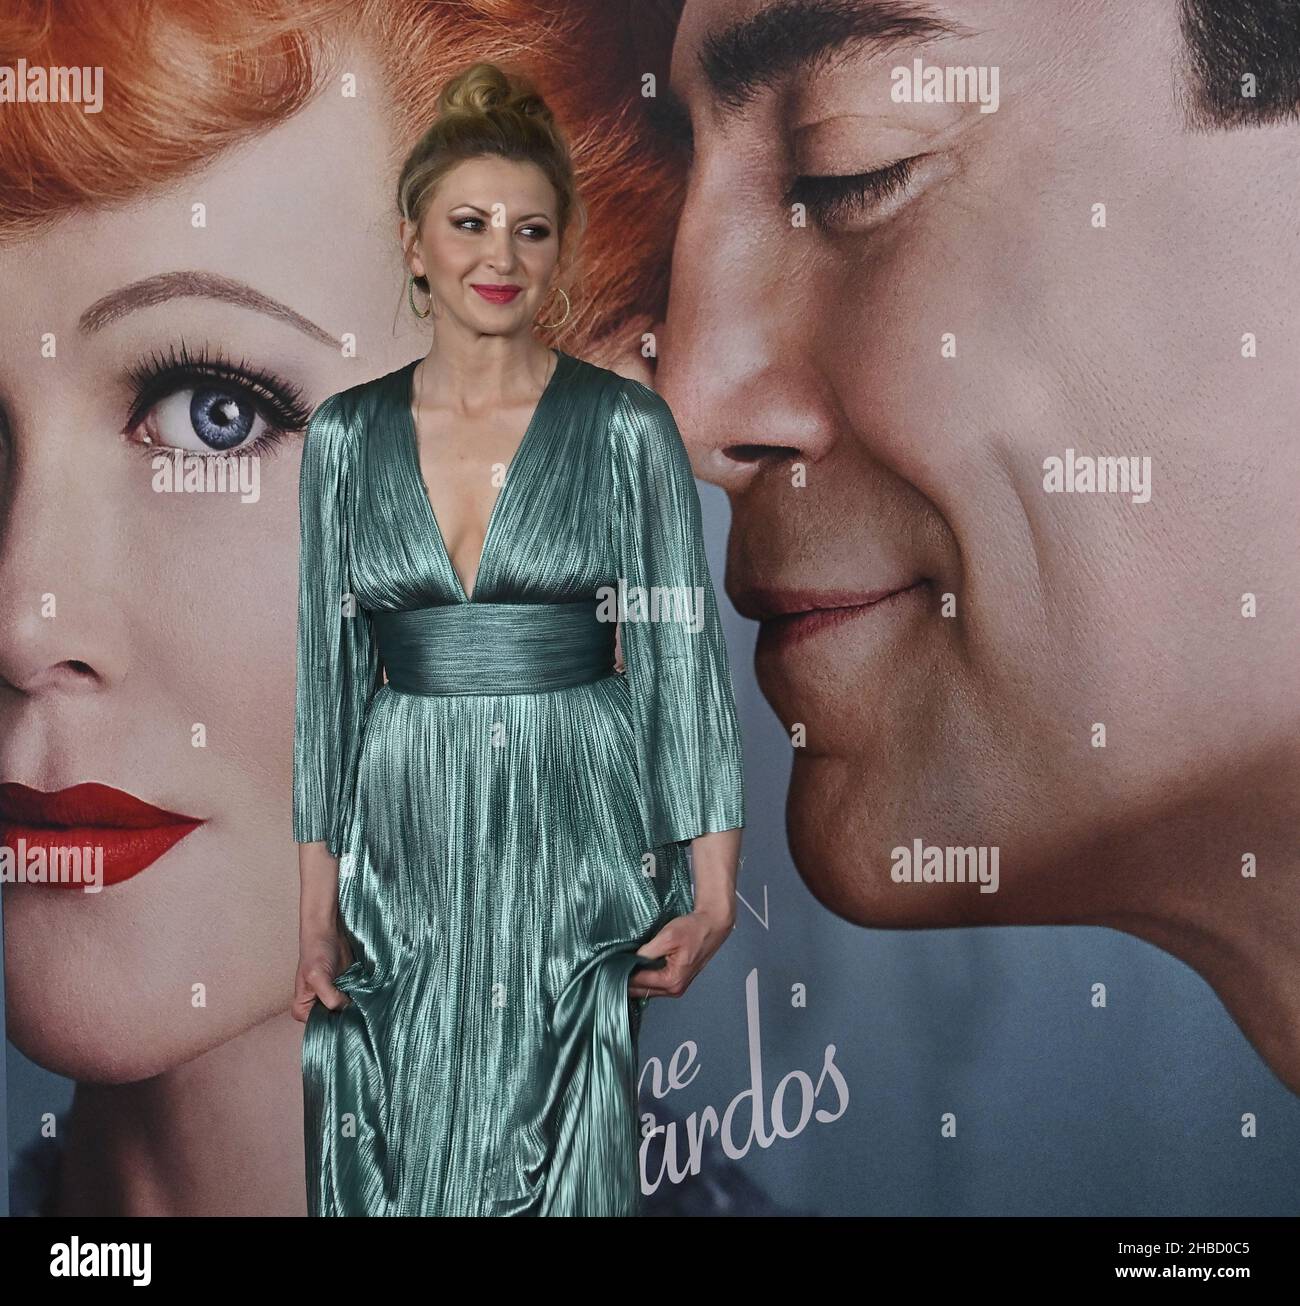 Los Angeles, United States. 18th Dec, 2021. Cast member Nina Arianda attends the premiere of the motion picture biographical drama 'Being the Ricardos' at the Academy Museum in Los Angeles on Monday, December 6, 2021. Photo by Jim Ruymen/UPI Credit: UPI/Alamy Live News Stock Photo